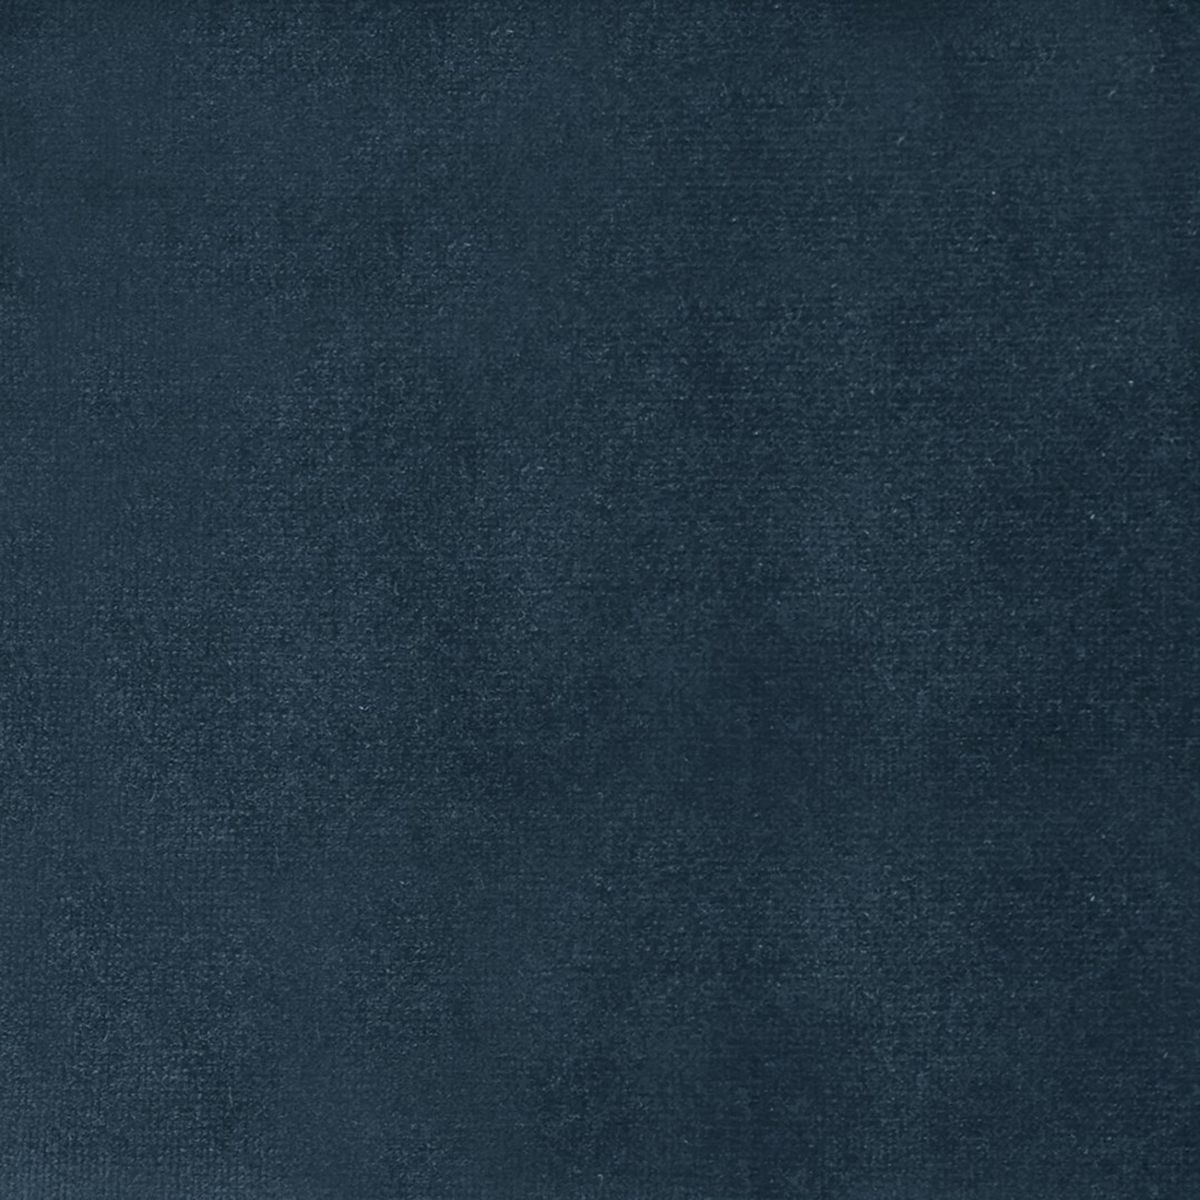 Sapphire Teal Velvet Fabric by Voyage Maison